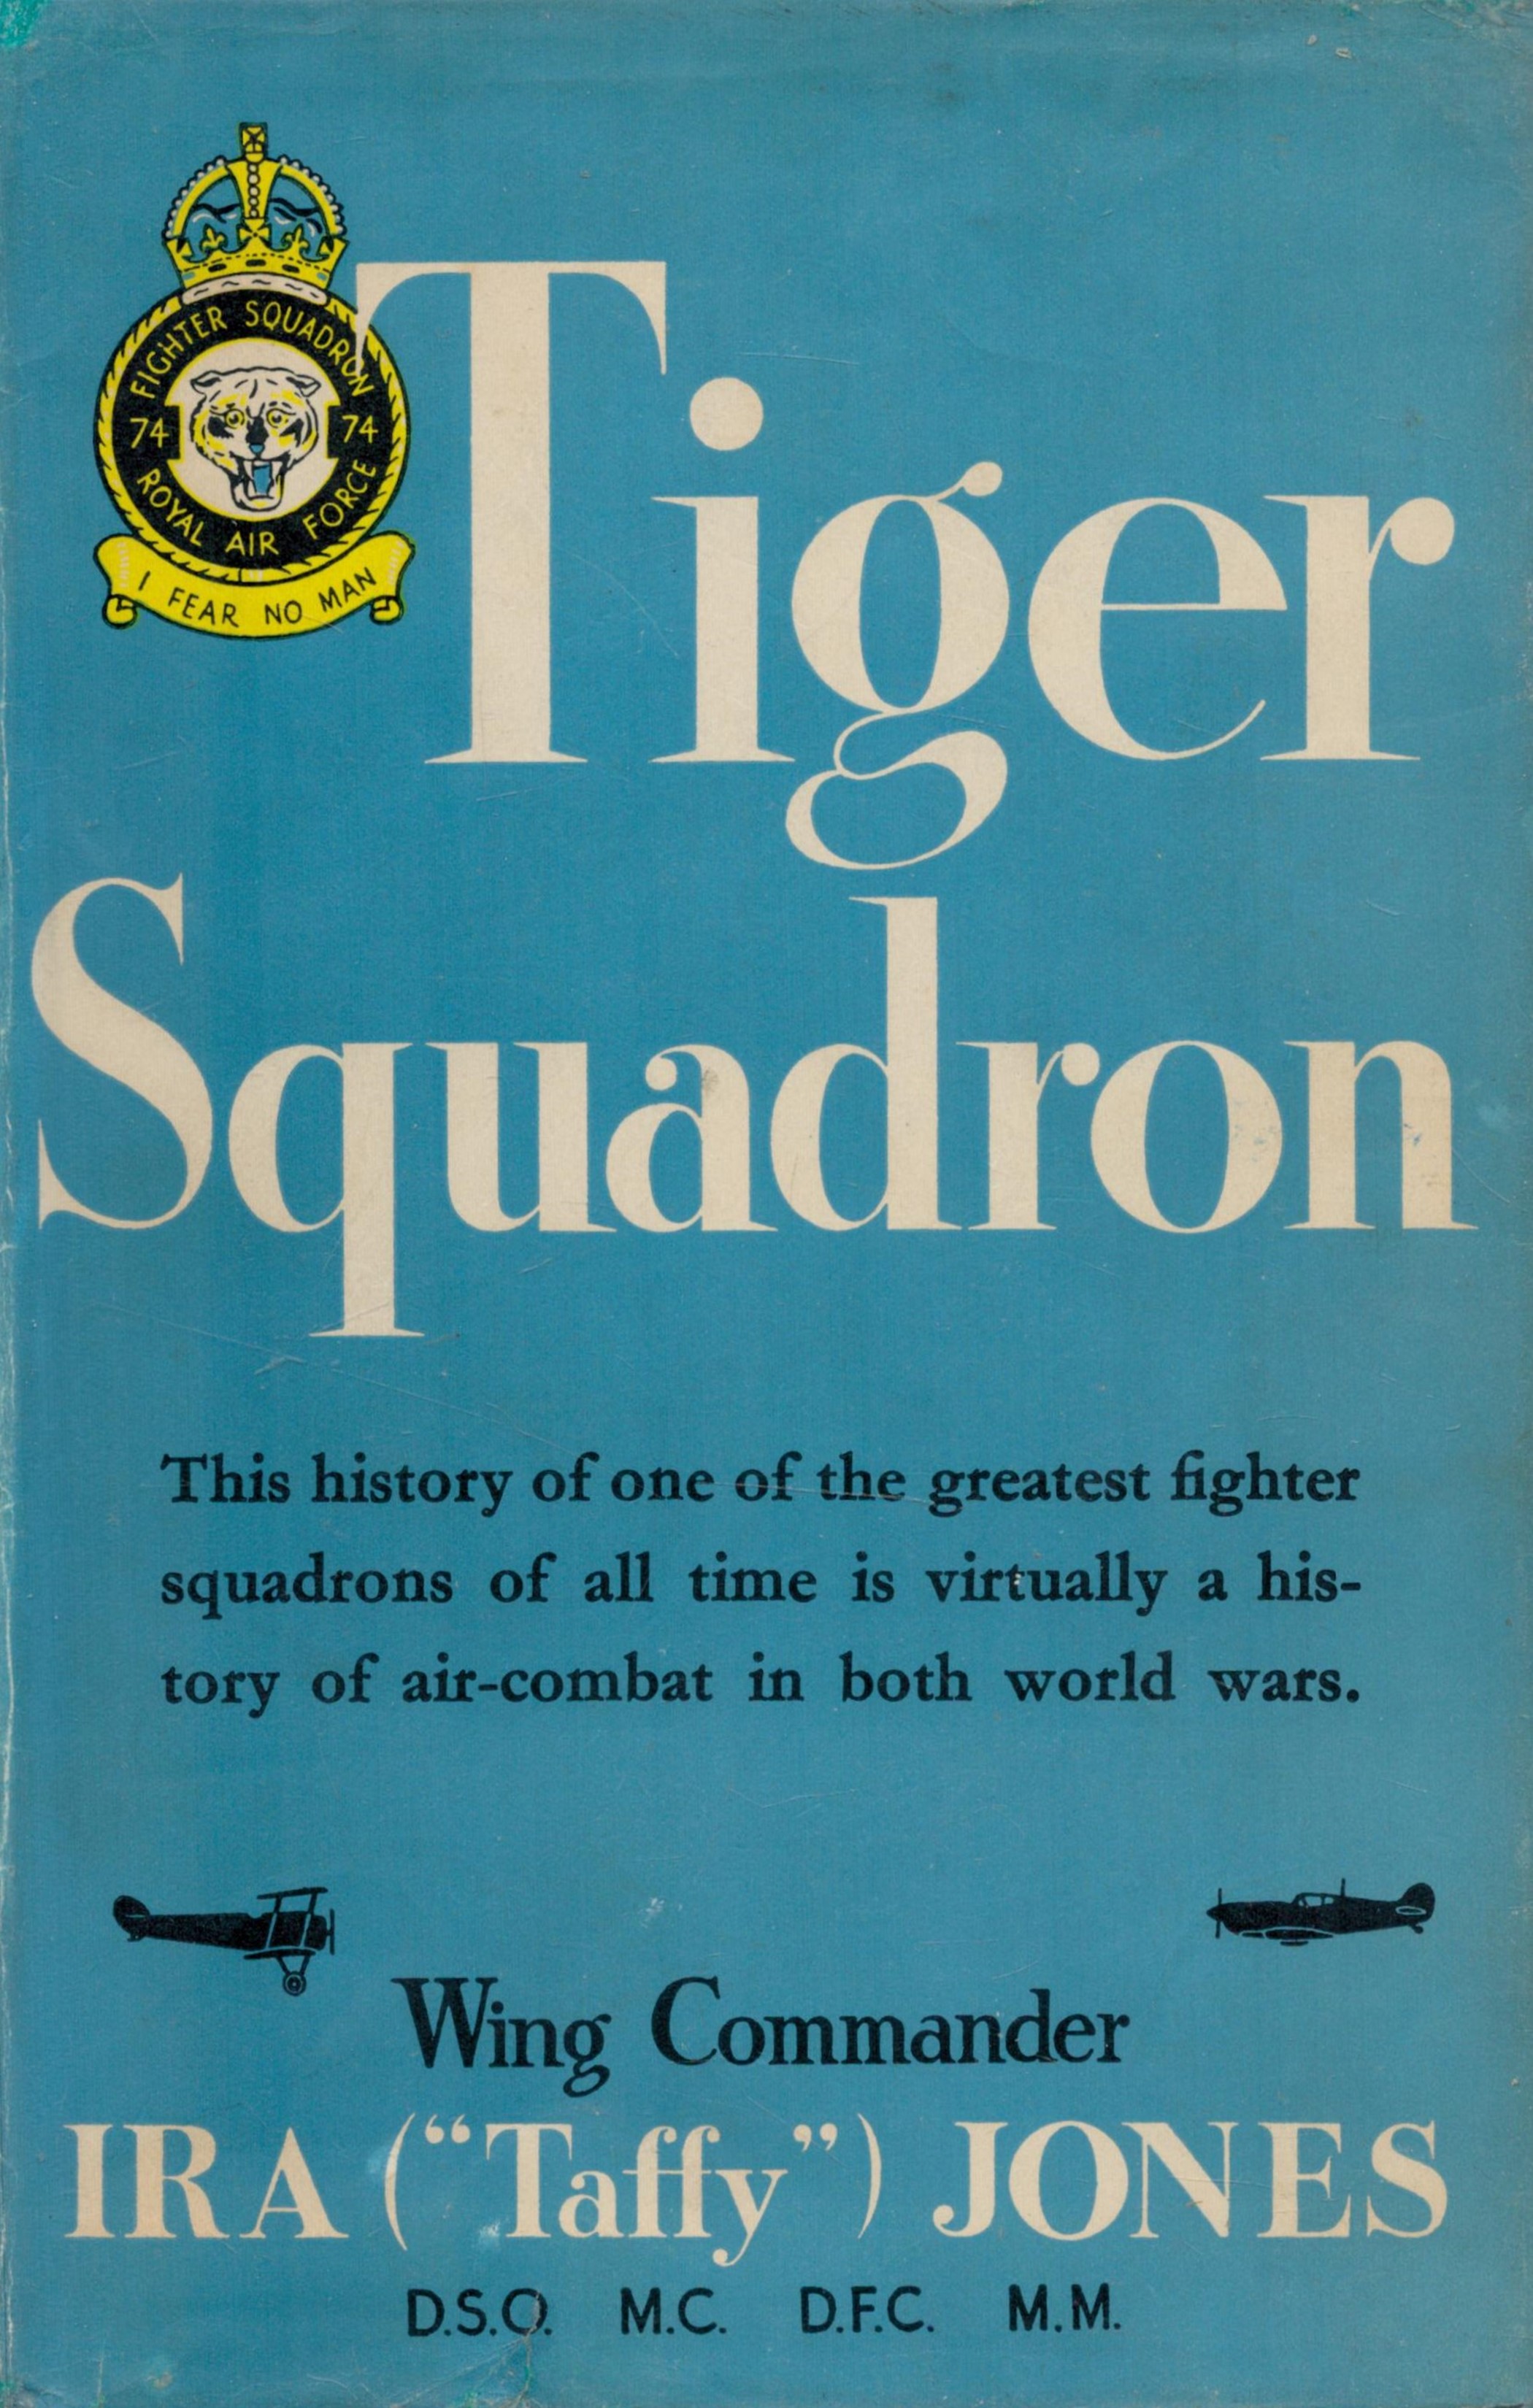 Tiger Squadron by Wing Commander Ira Taffy Jones DSO MC DFC 1954 Fifth Impression Hardback Book with